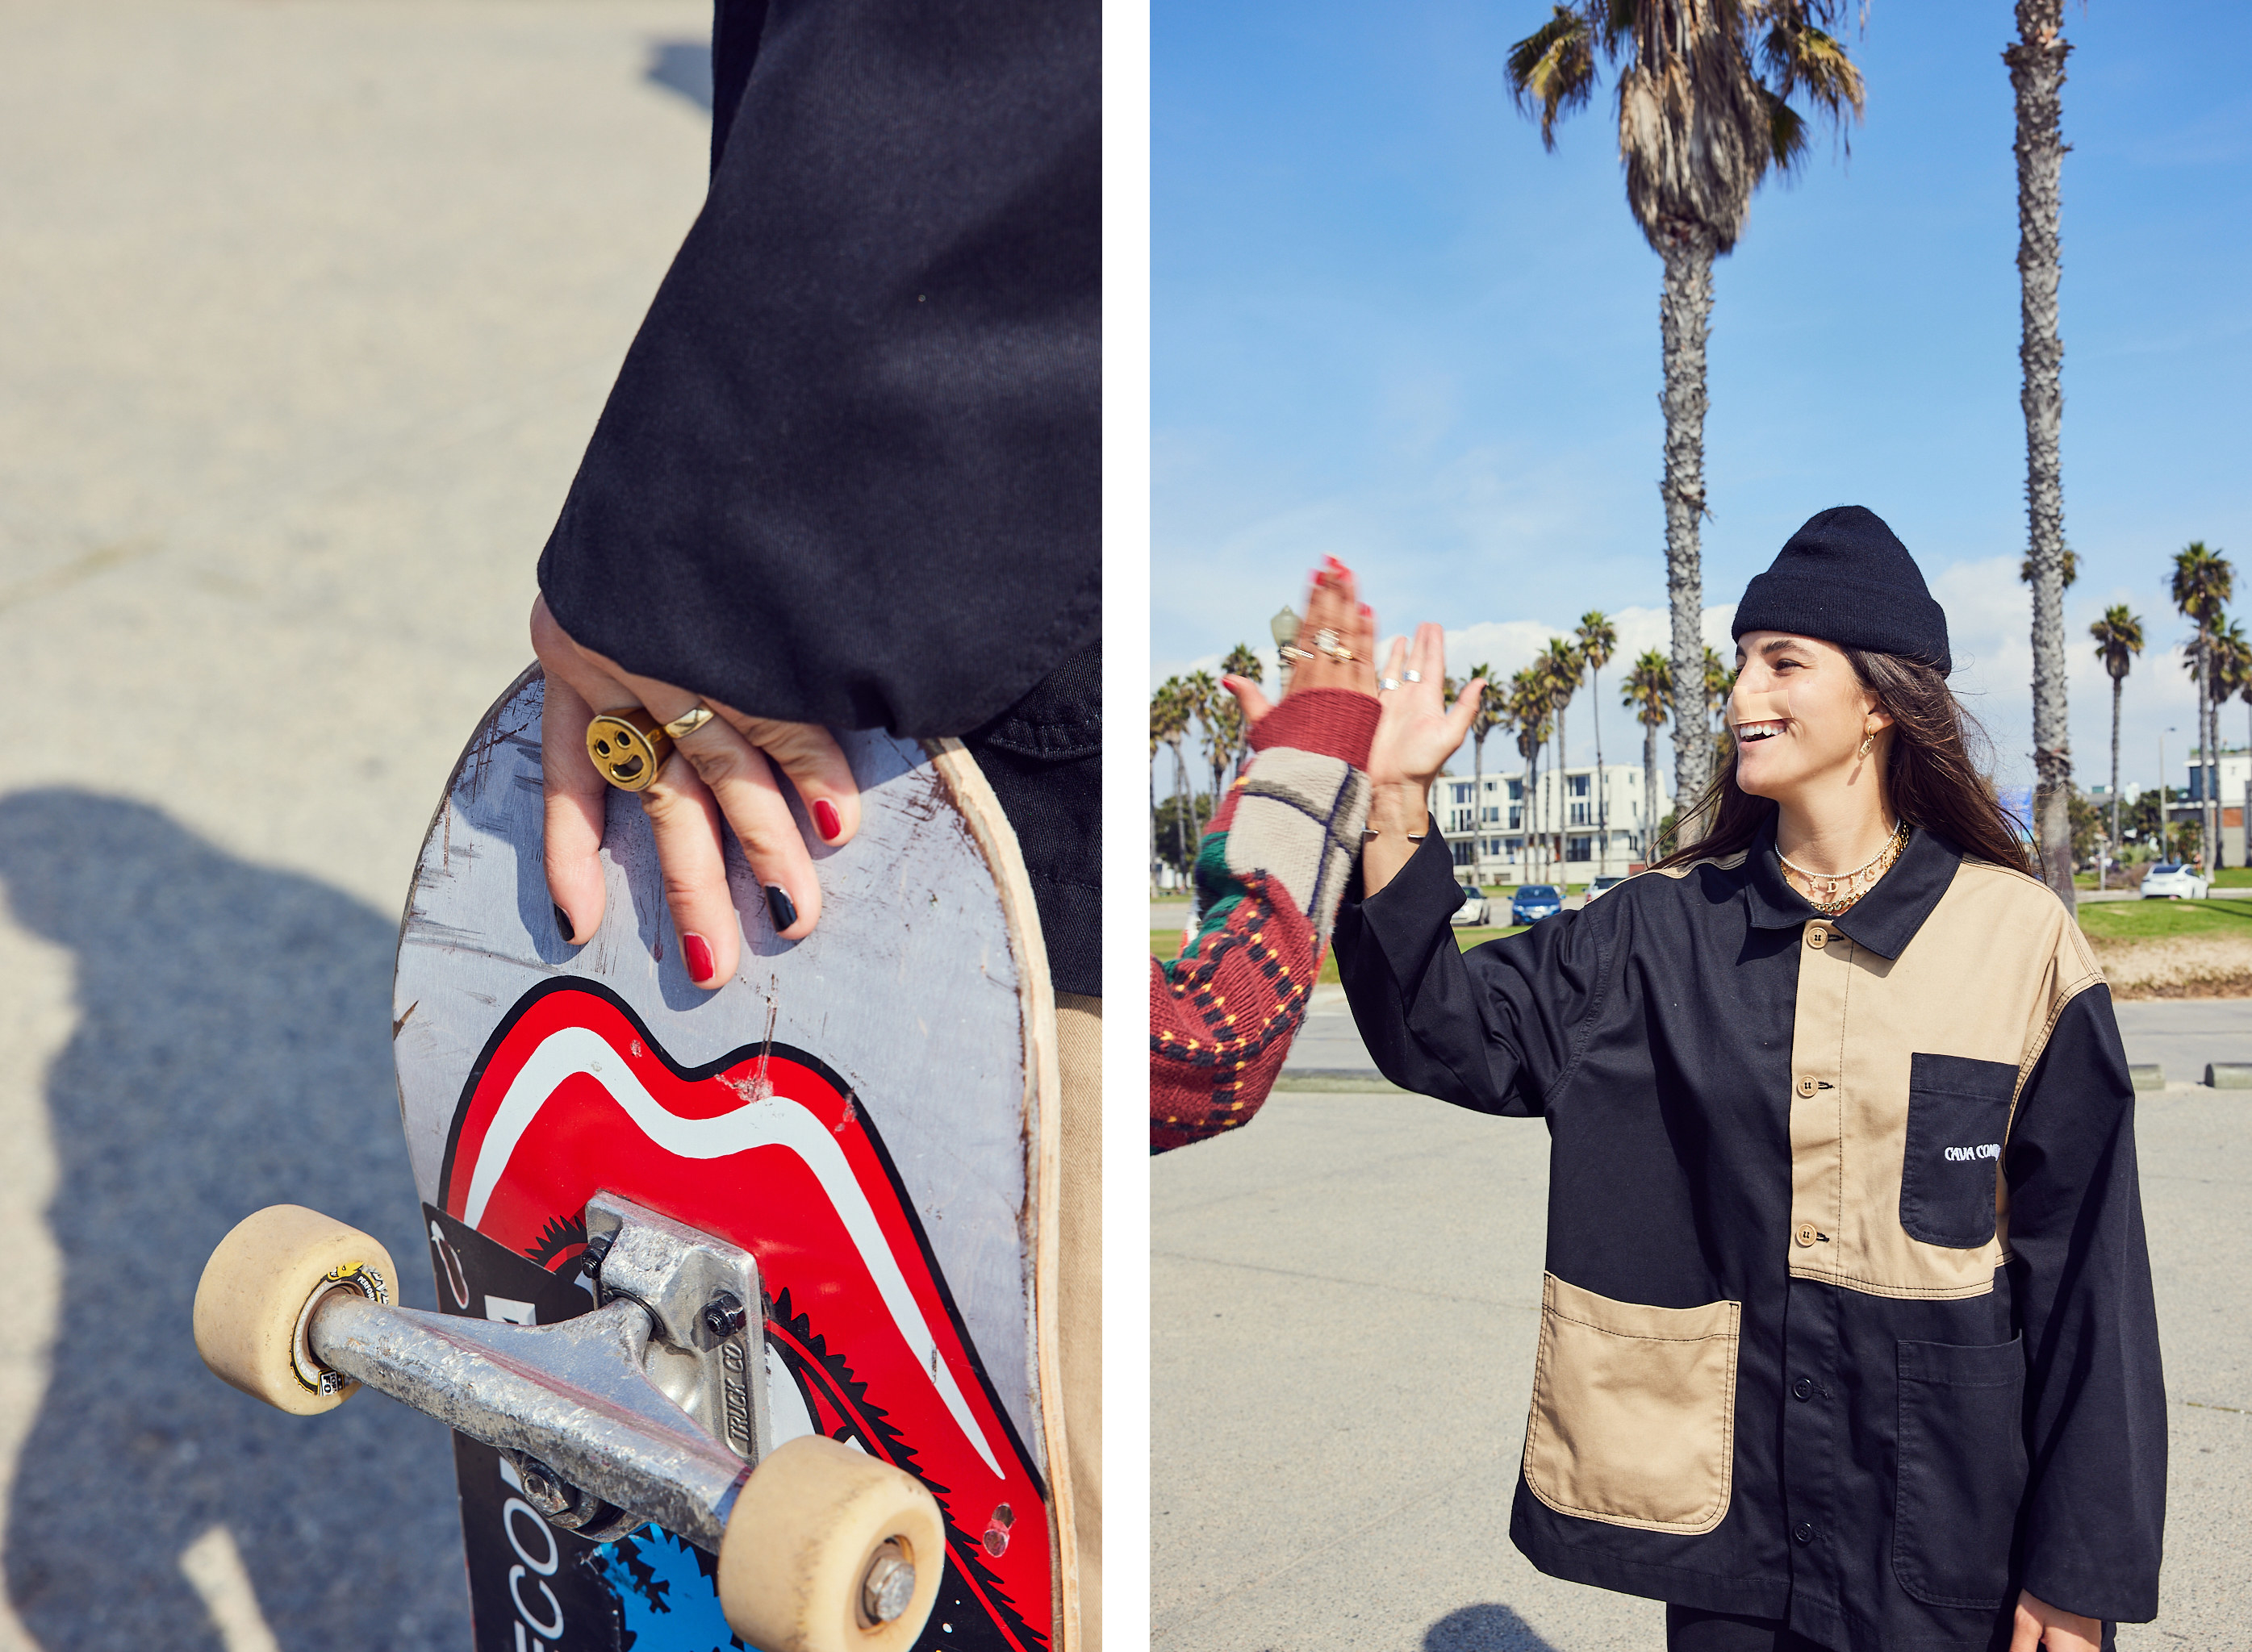 Skater and influencer Brooklinn Khoury&#x27;s hand with a smiley ring and her skateboard, right, Khoury high fiving someone with palm trees in the background